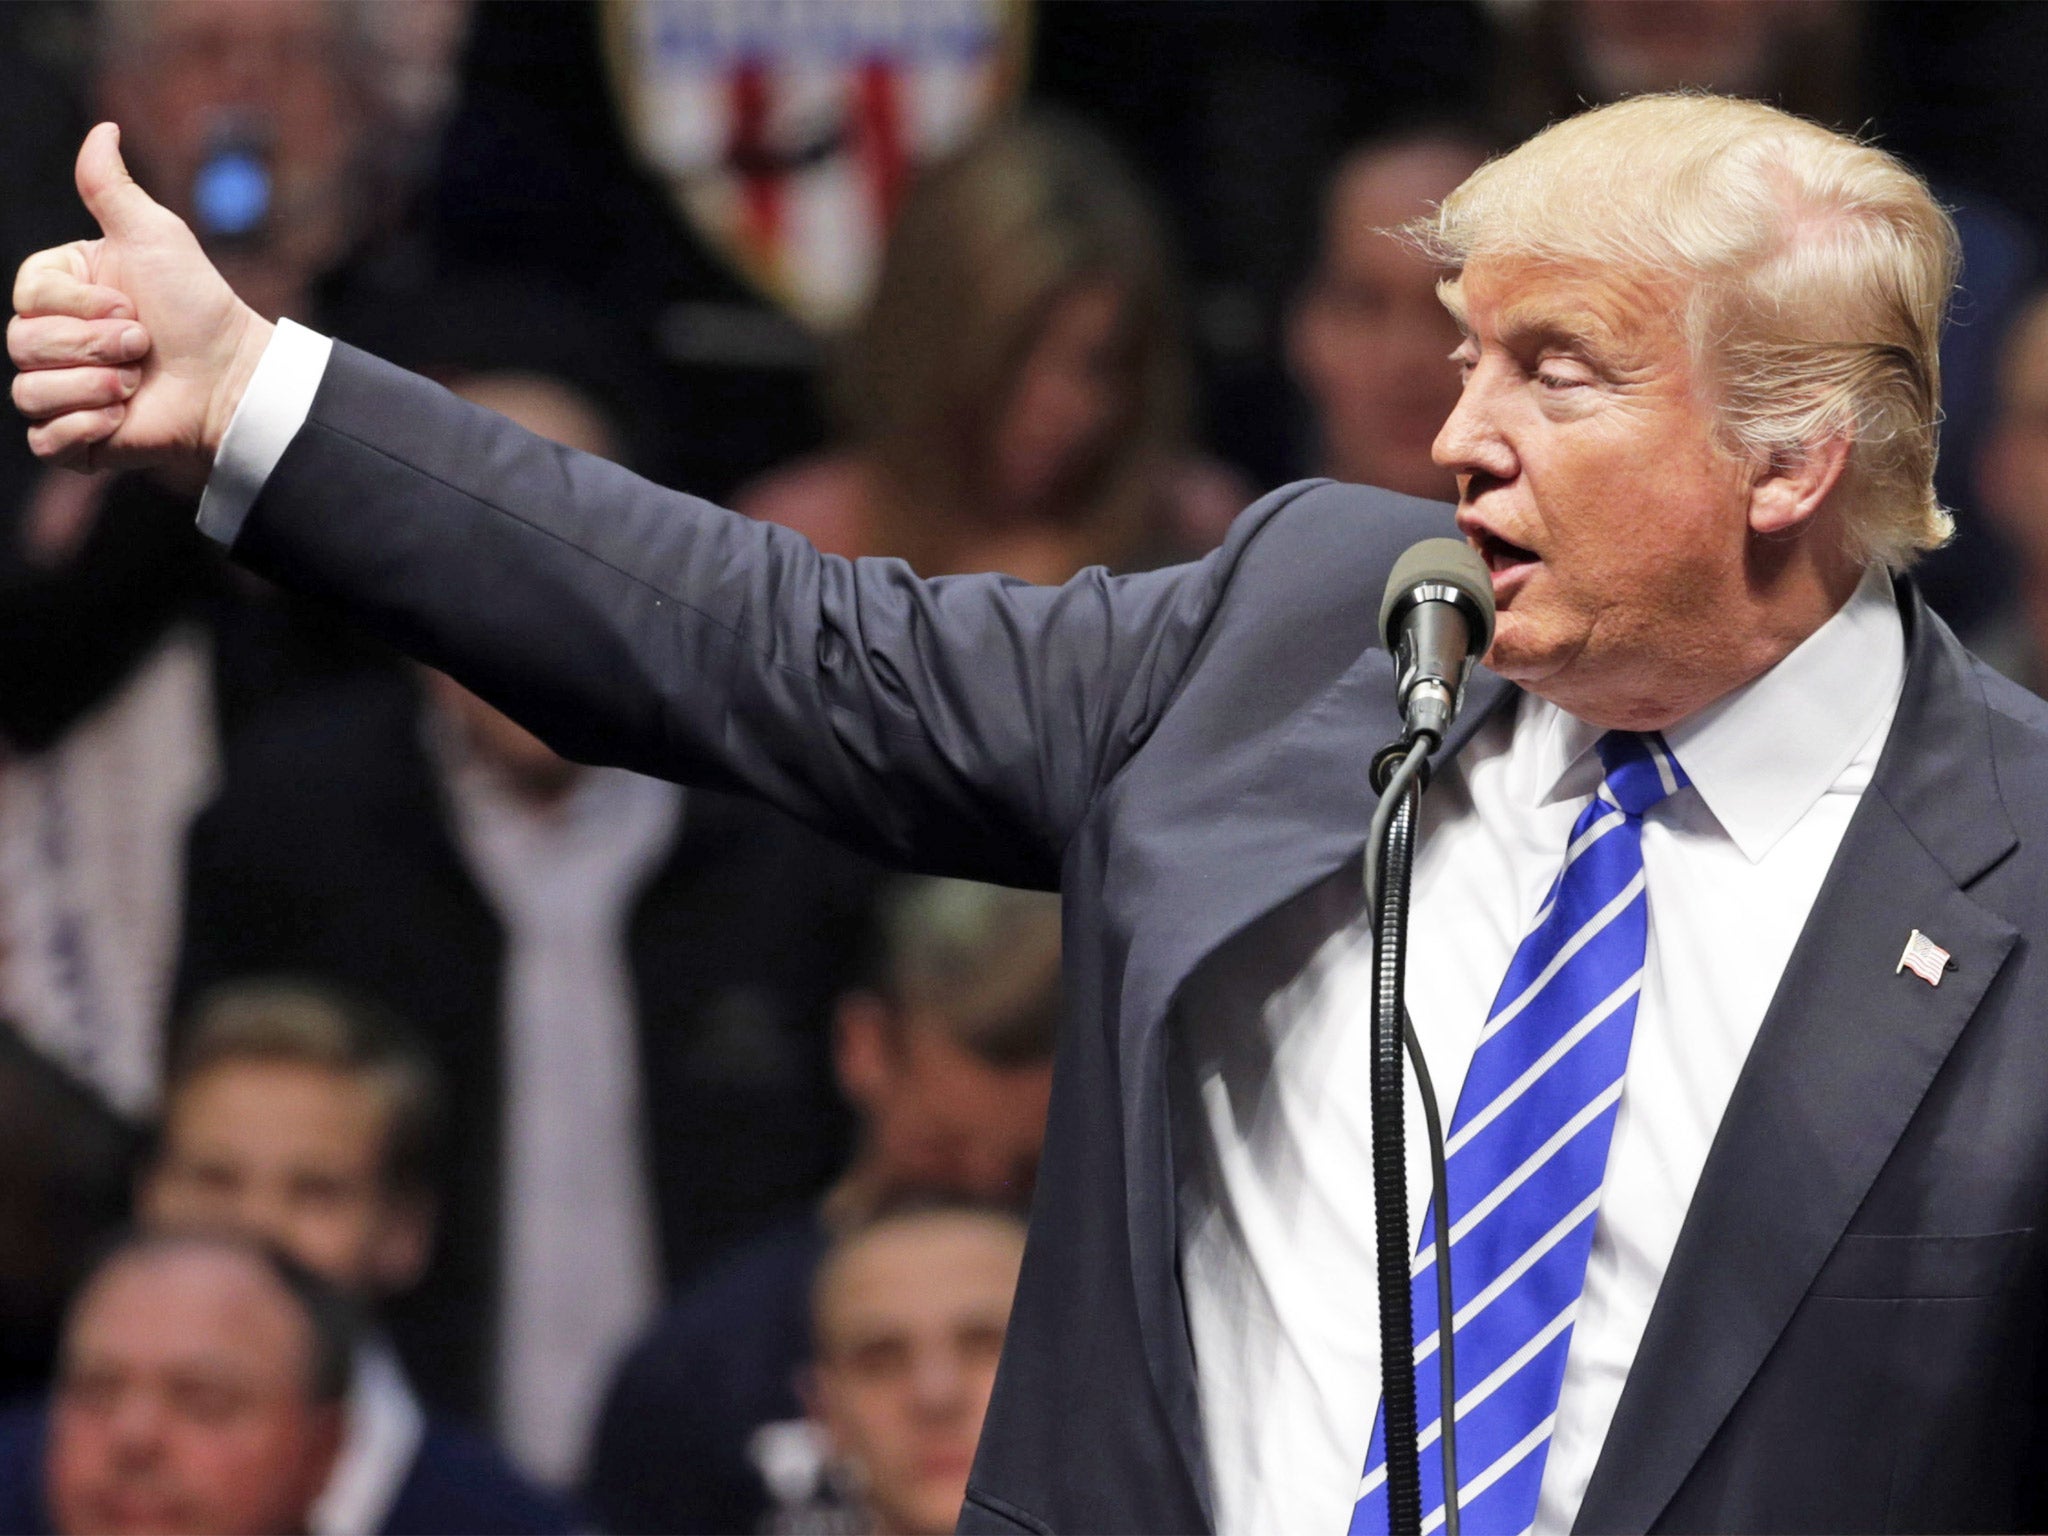 Donald Trump's campaign has been marked by controversial comments about immigrants